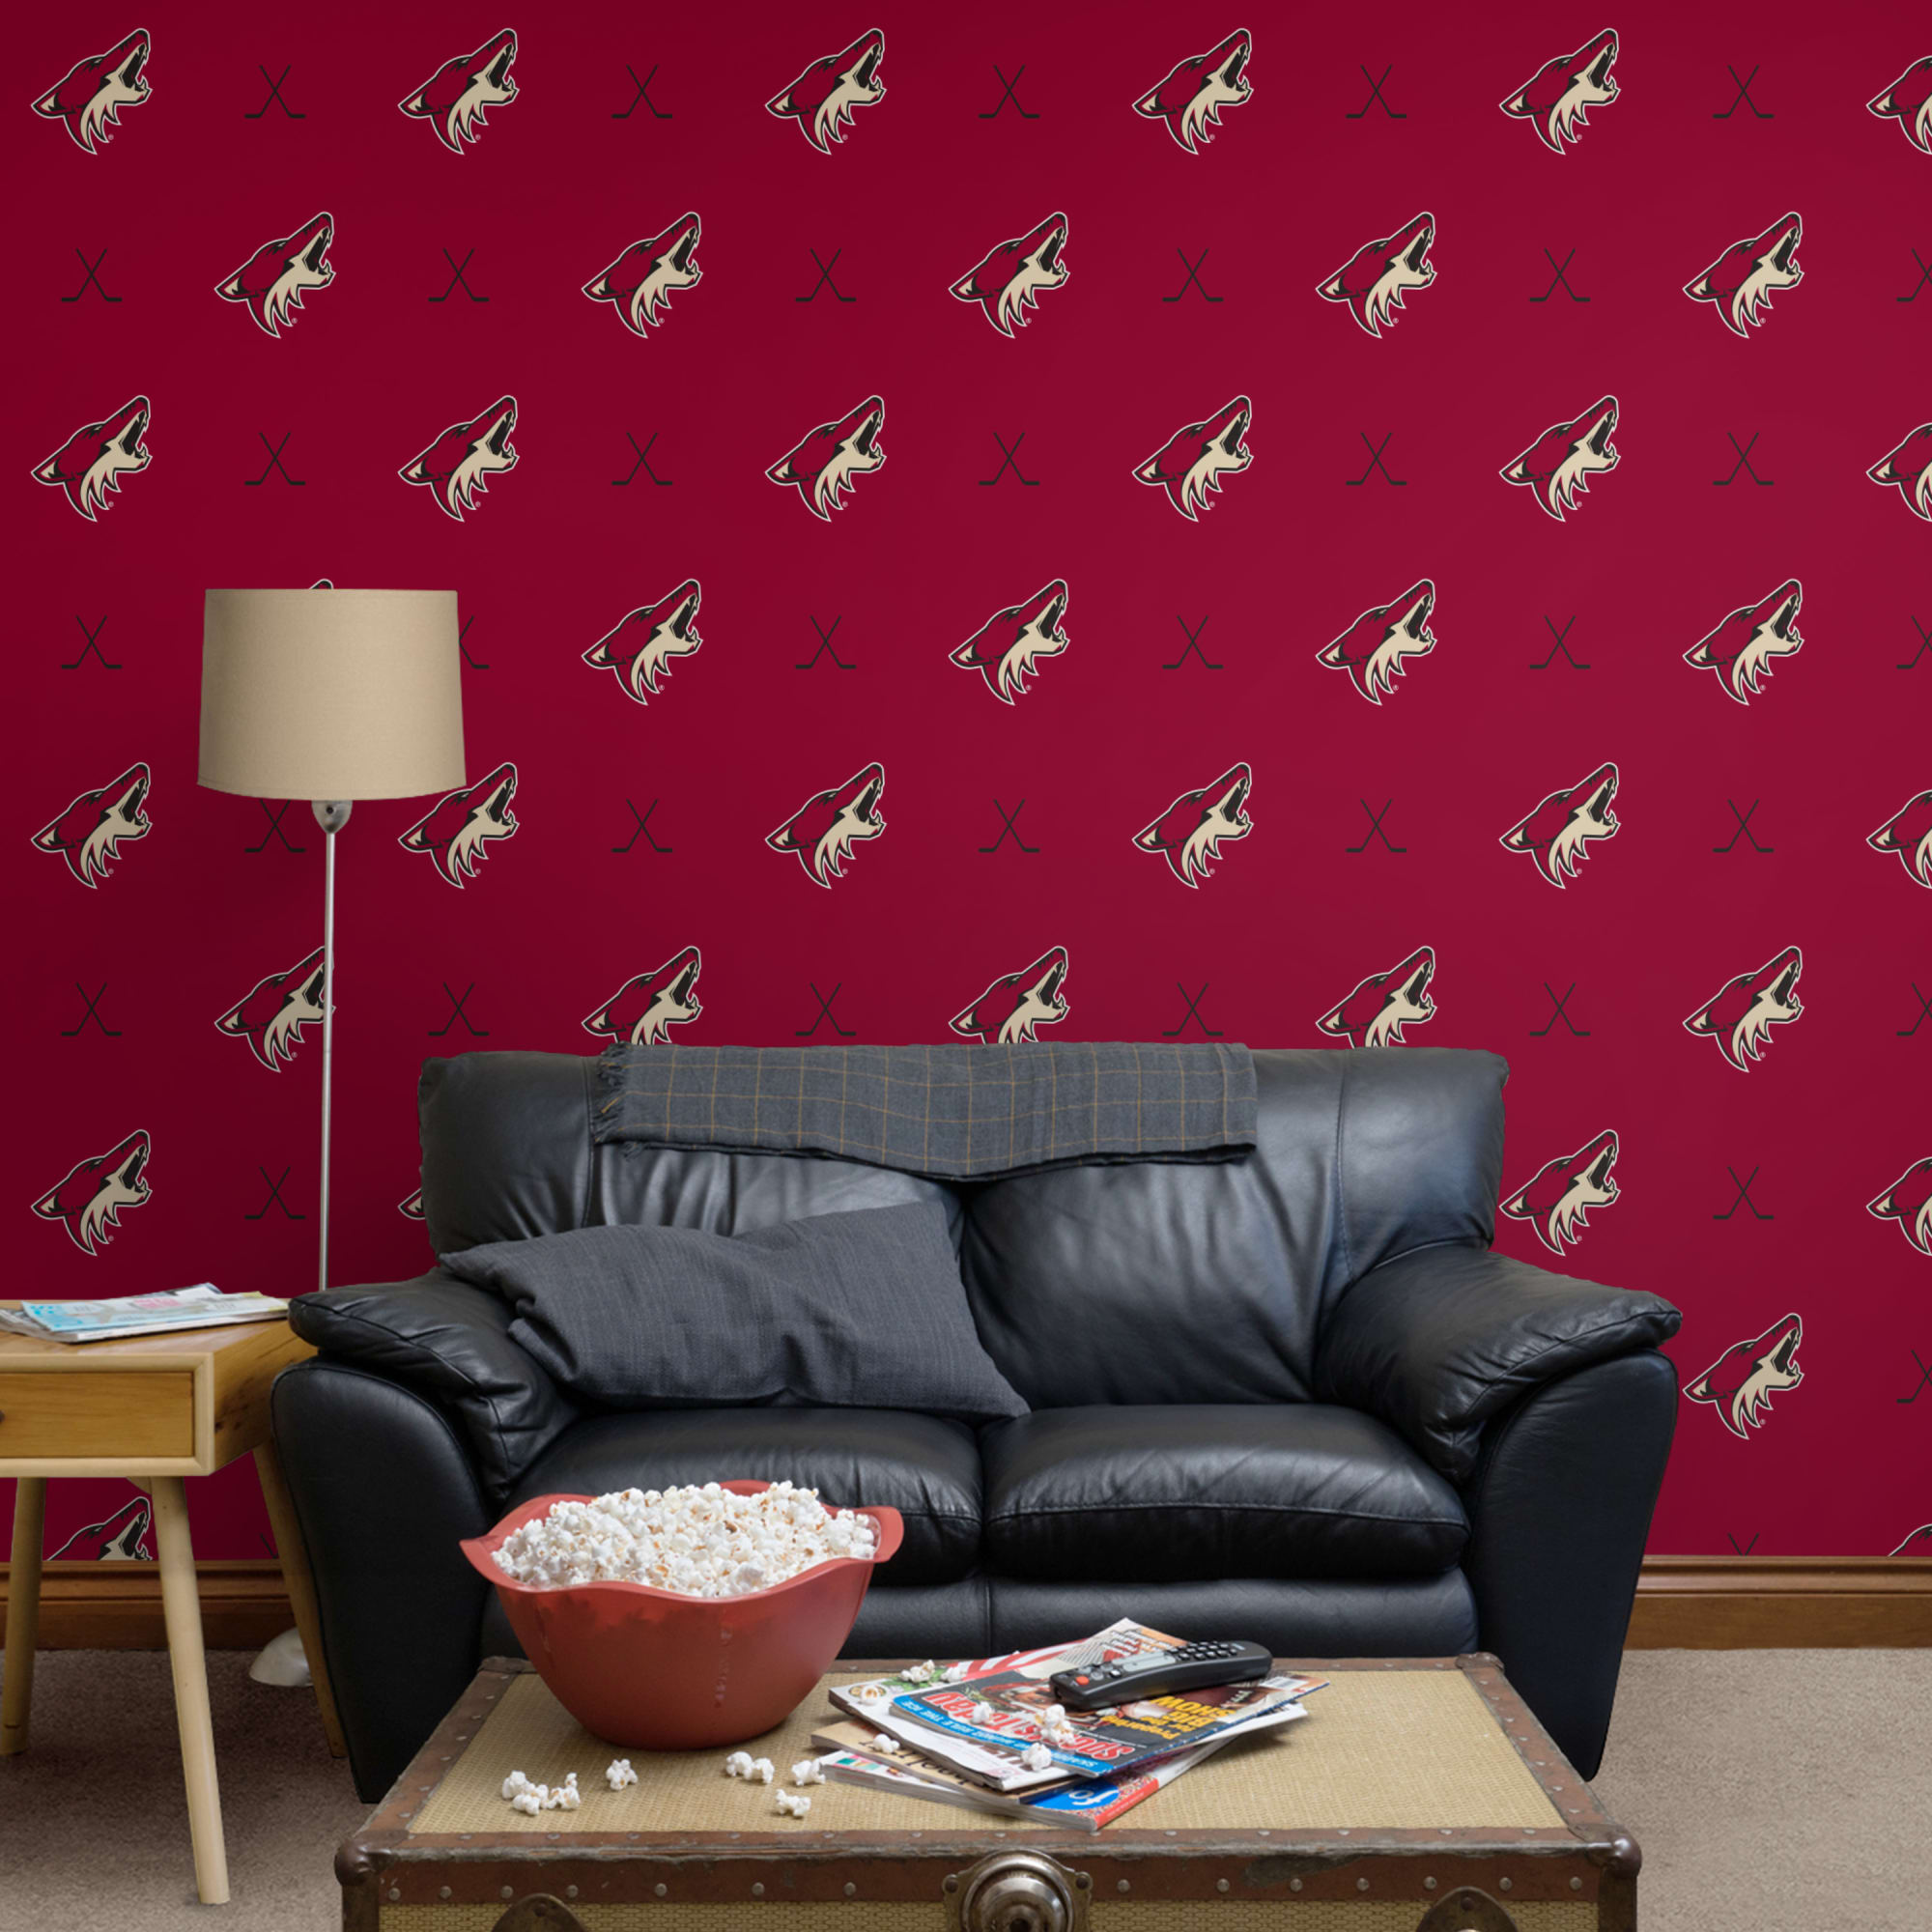 Arizona Coyotes: Sticks Pattern - Officially Licensed NHL Removable Wallpaper 12" x 12" Sample by Fathead | 100% Vinyl